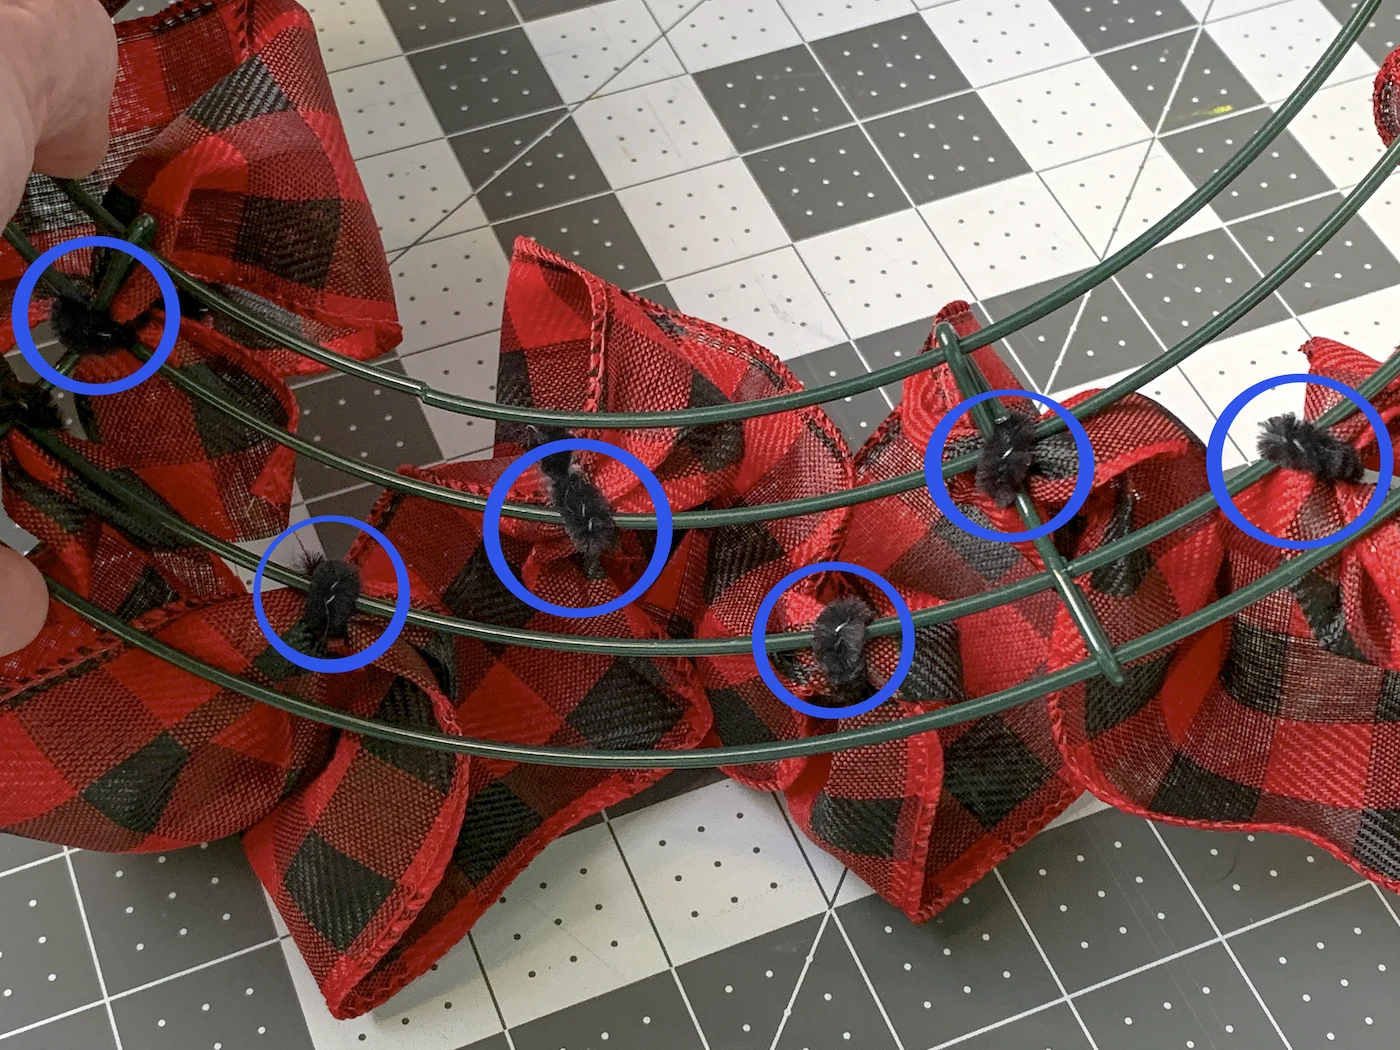 Pipe cleaner attachment points with blue circles